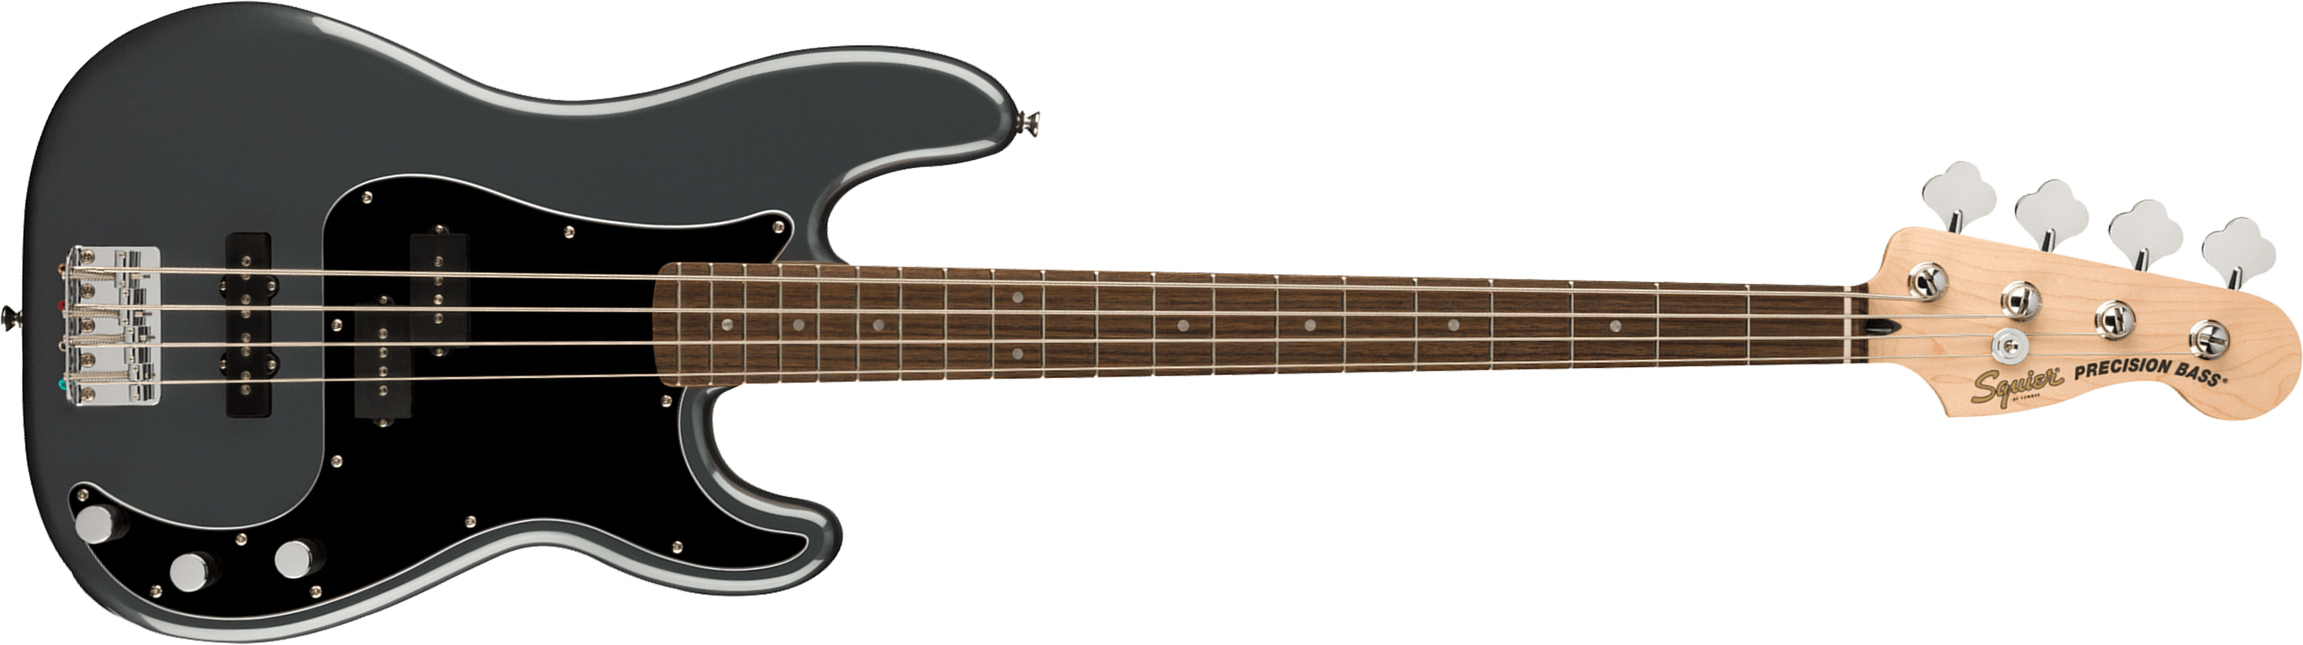 Squier Precision Bass Affinity Pj 2021 Lau - Charcoal Frost Metallic - Solidbody E-bass - Main picture